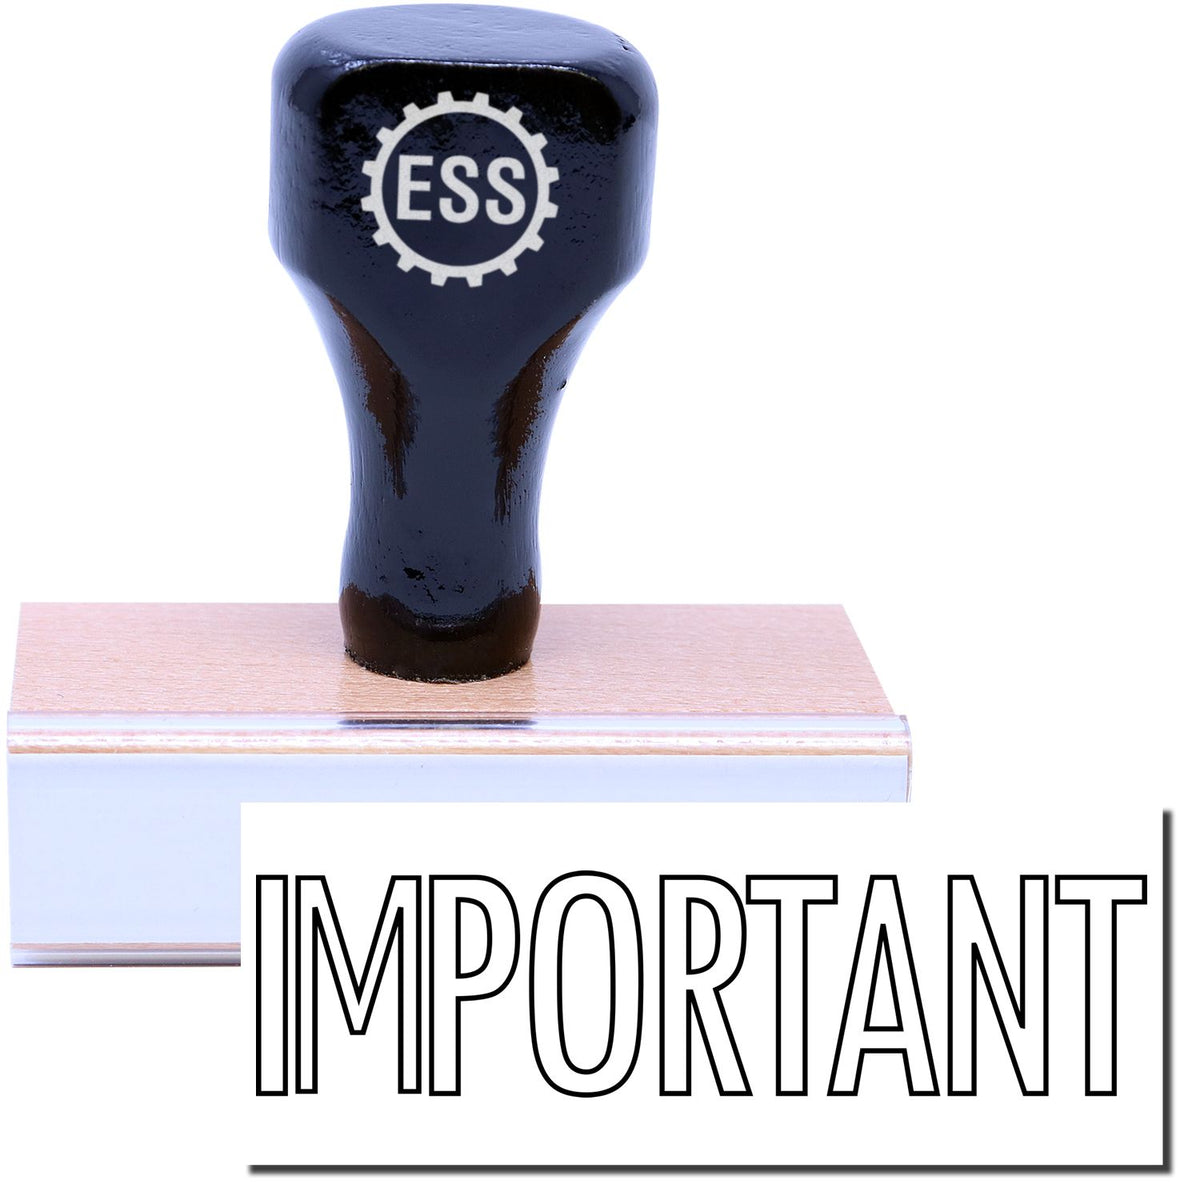 A stock office rubber stamp with a stamped image showing how the text &quot;IMPORTANT&quot; in a large outline font is displayed after stamping.